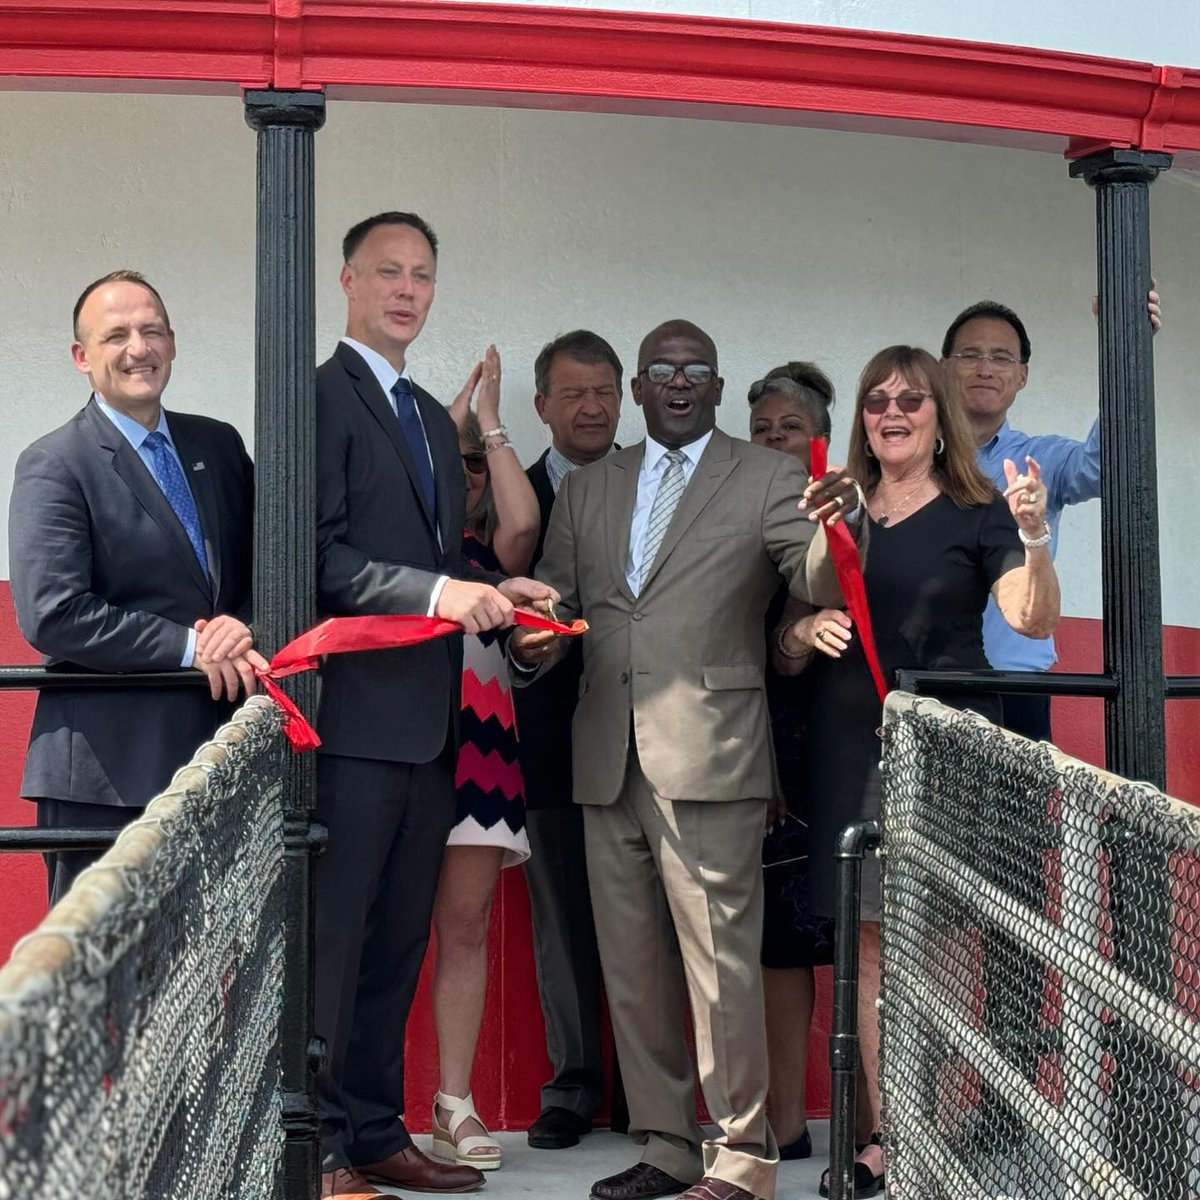 Westchester County Executive George Latimer reopened the Tarrytown Lighthouse in Sleepy Hollow. A ribbon-cutting ceremony was held in commemoration of the completion of the $3.4 million capital project to fully revamp and rehabilitate the structure’s historic interior and